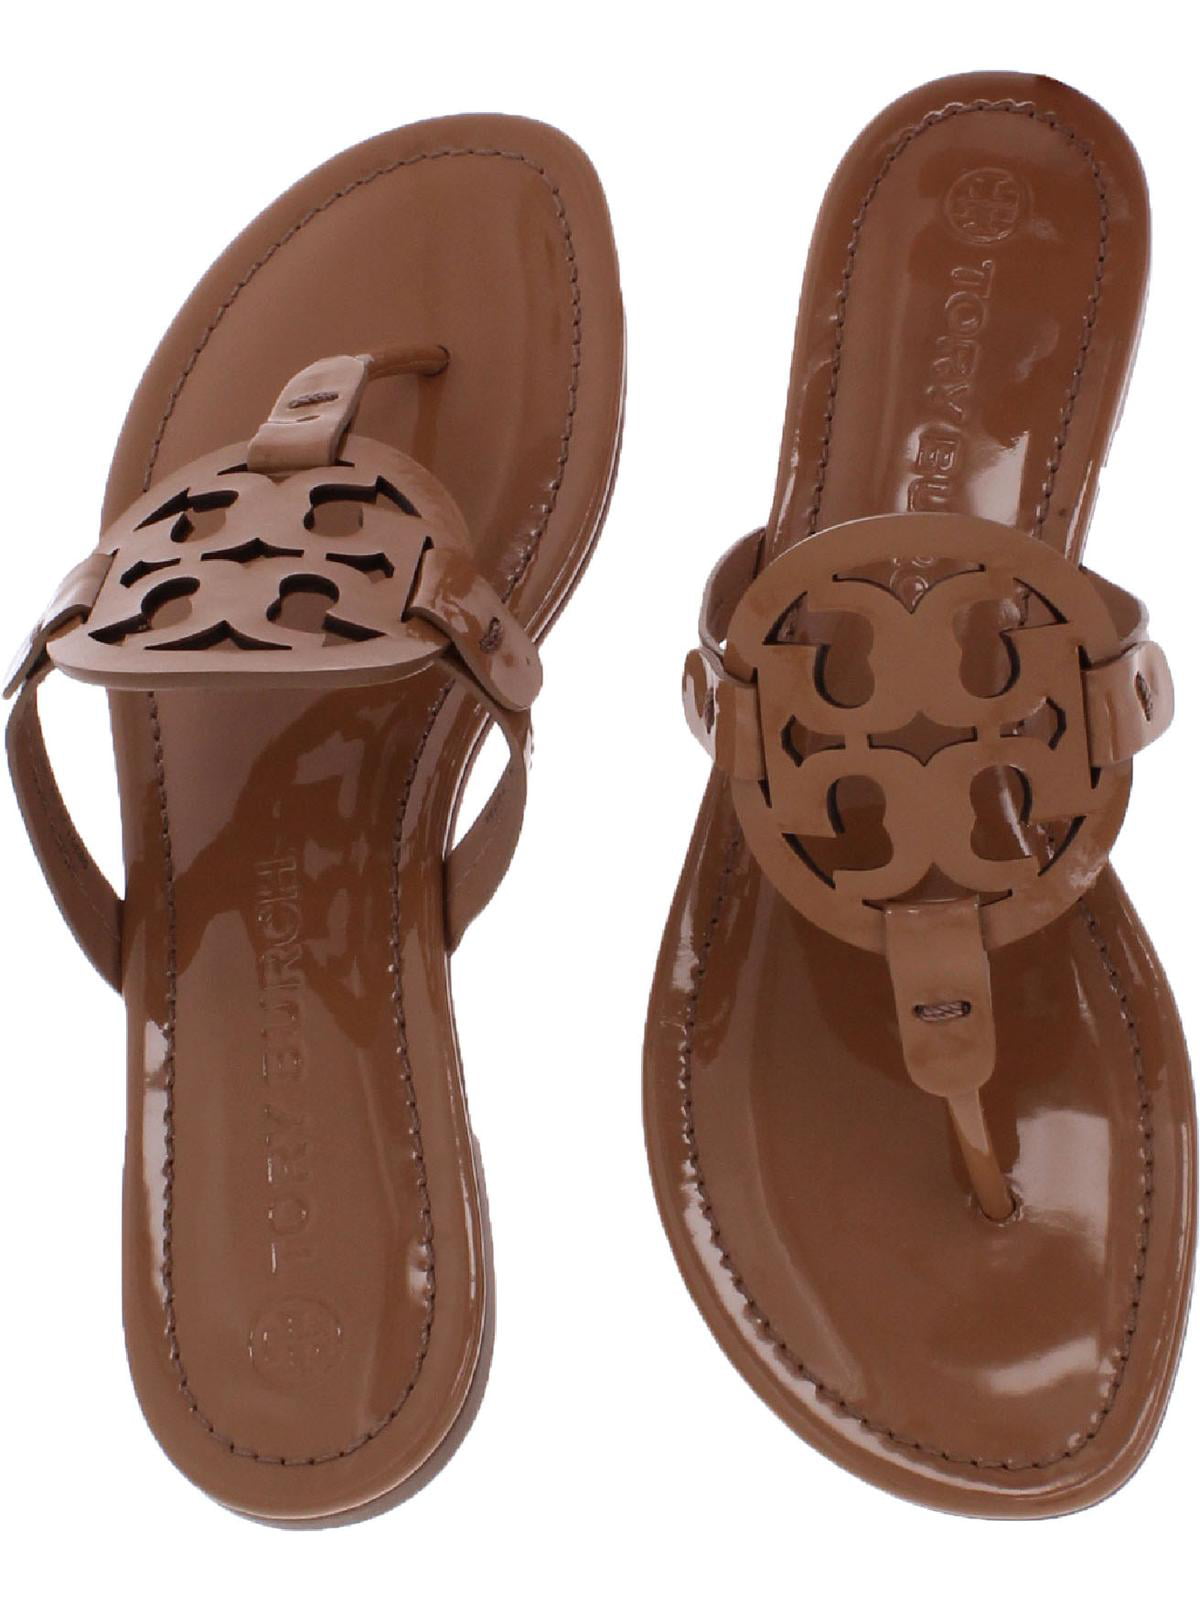 Tory Burch Women's Miller Soft Patent Sea Shell Pink / 654 Leather Sandal -  